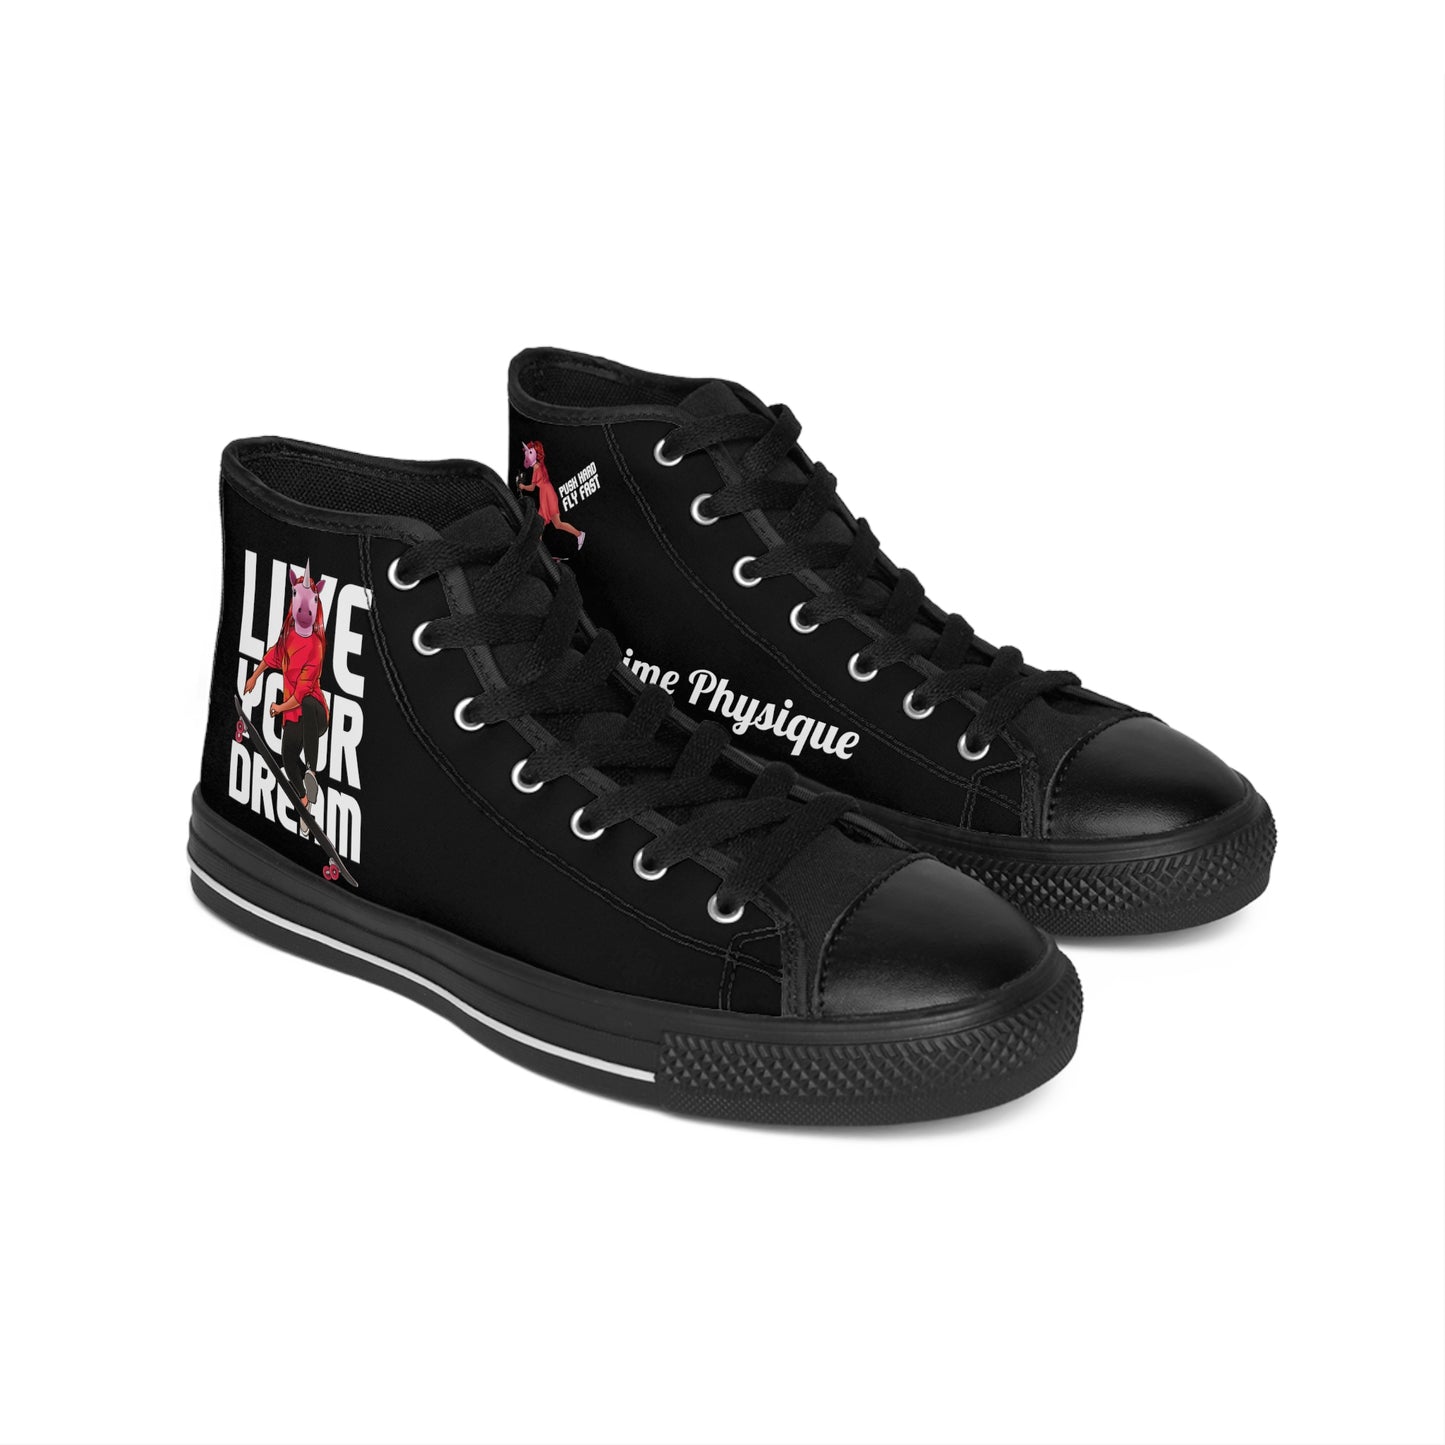 Live Your Dream Ebony High-top Sneakers